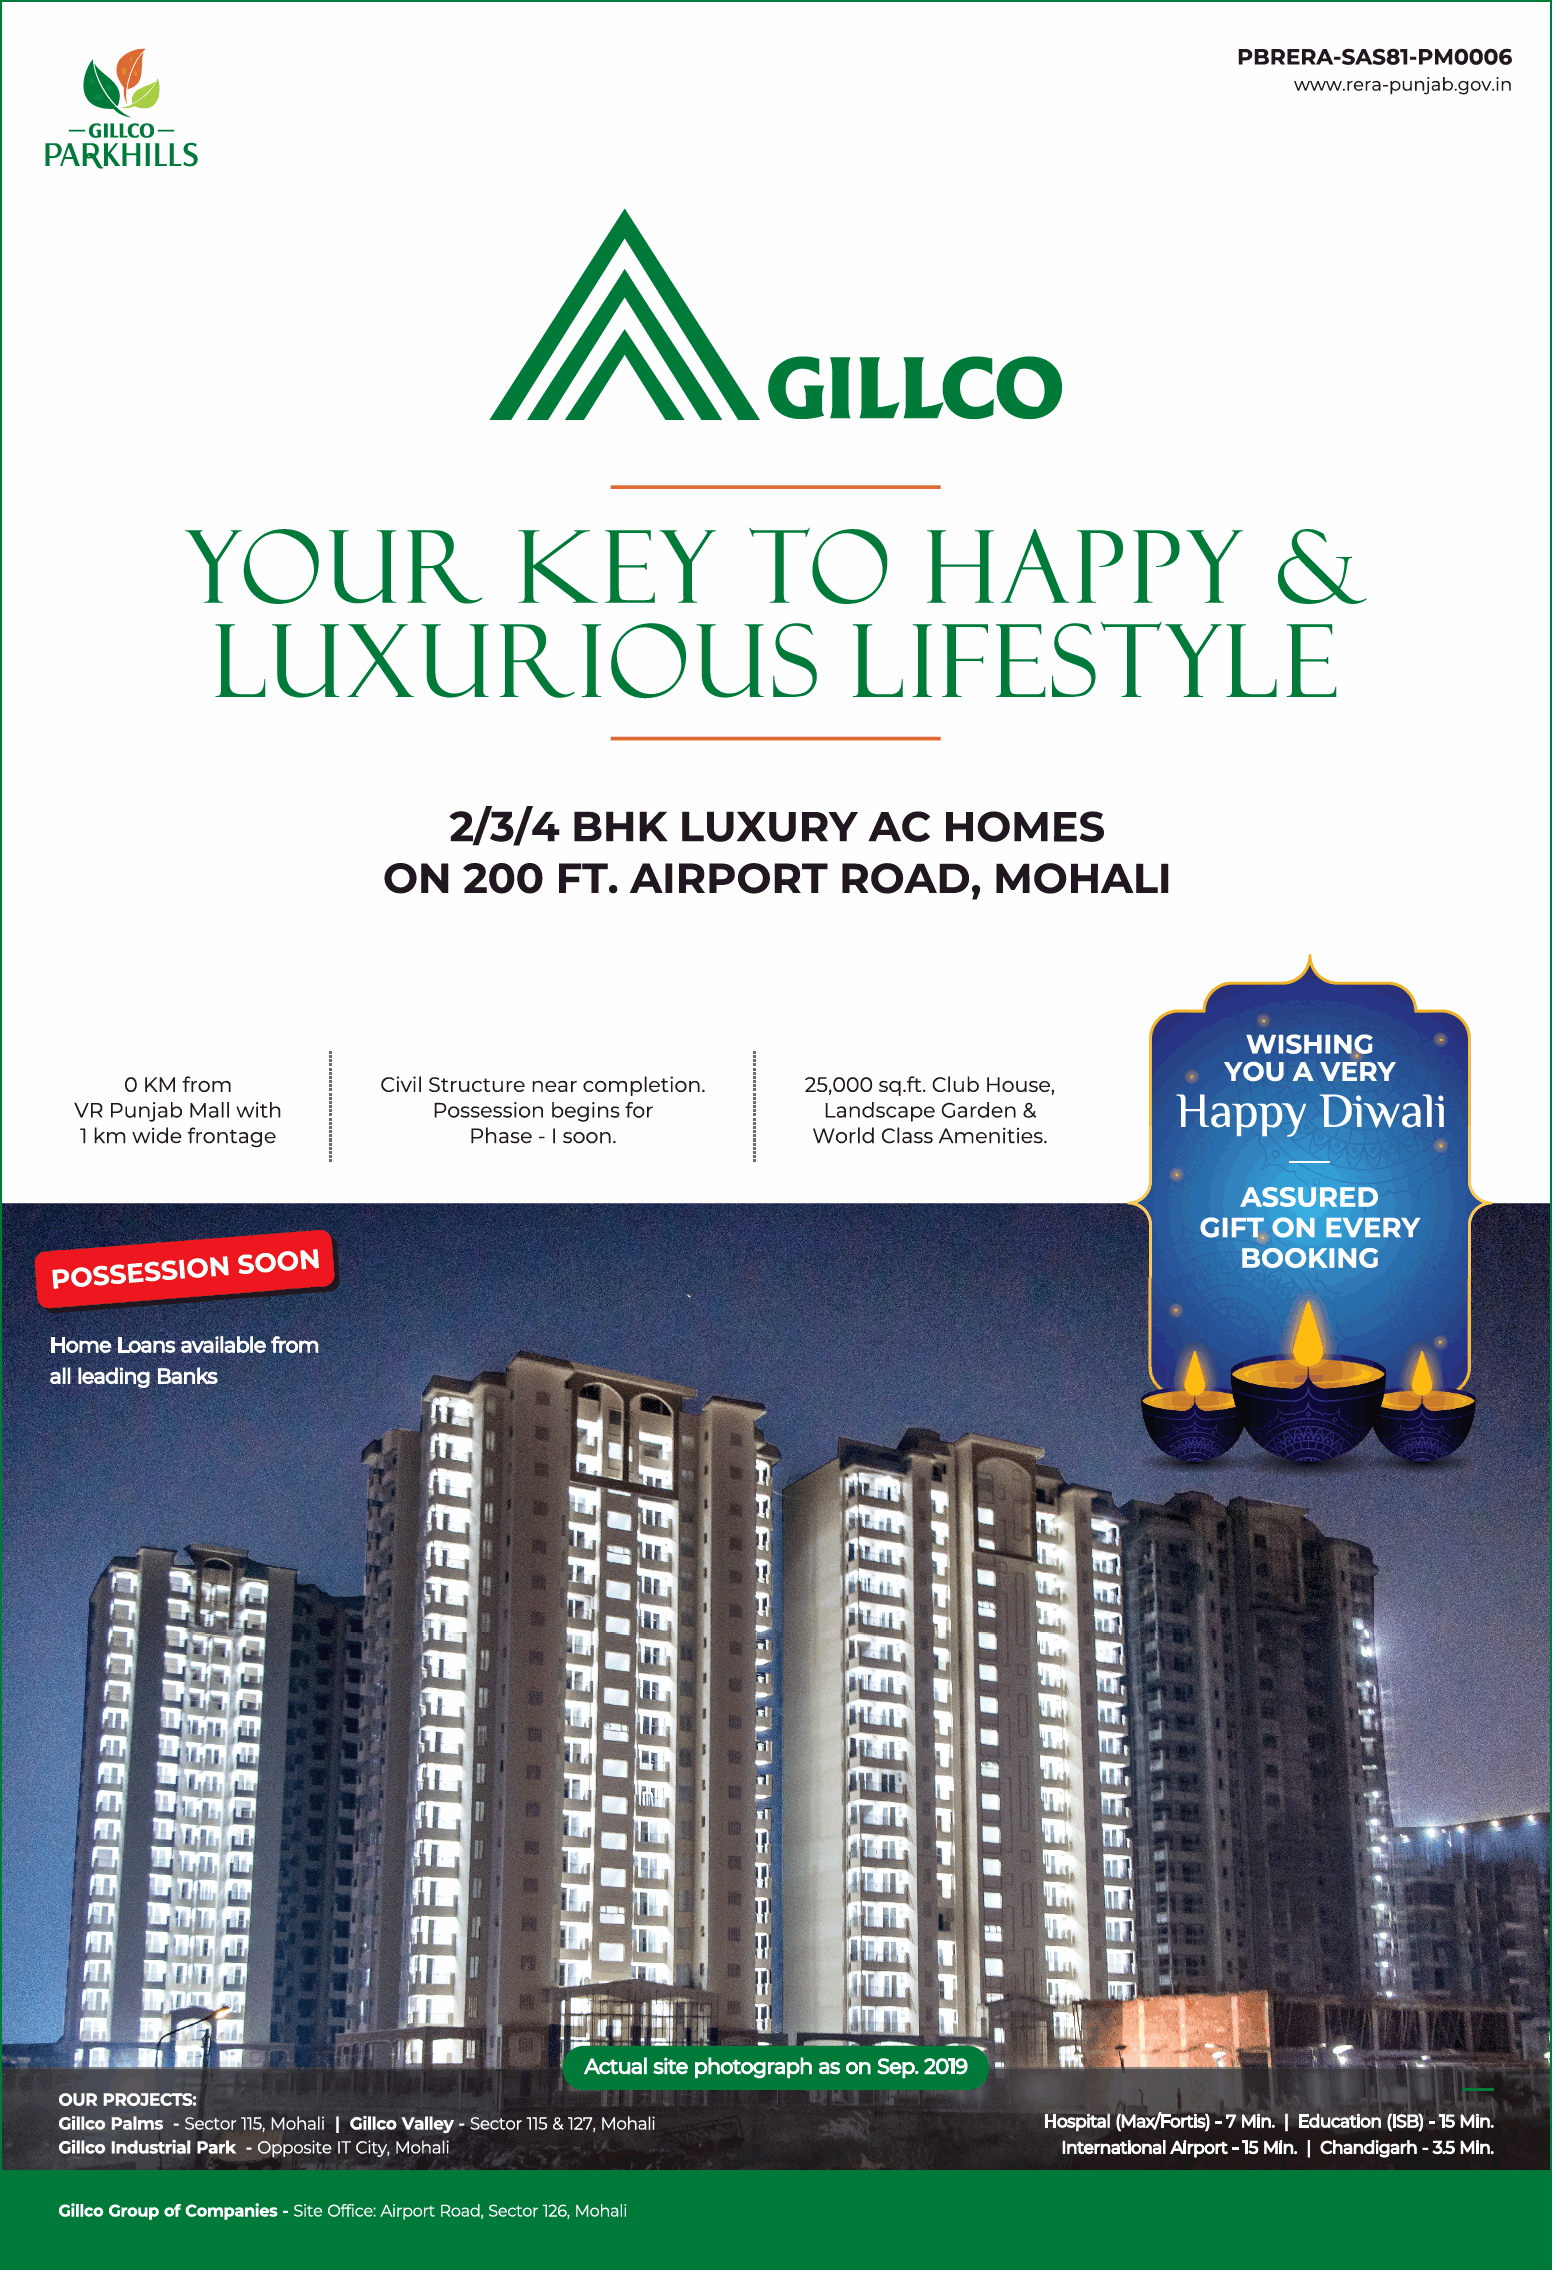 Book 2/3/4 BHK luxury ac homes at Gillco Parkhills in 200 ft. Airport Road, Mohali